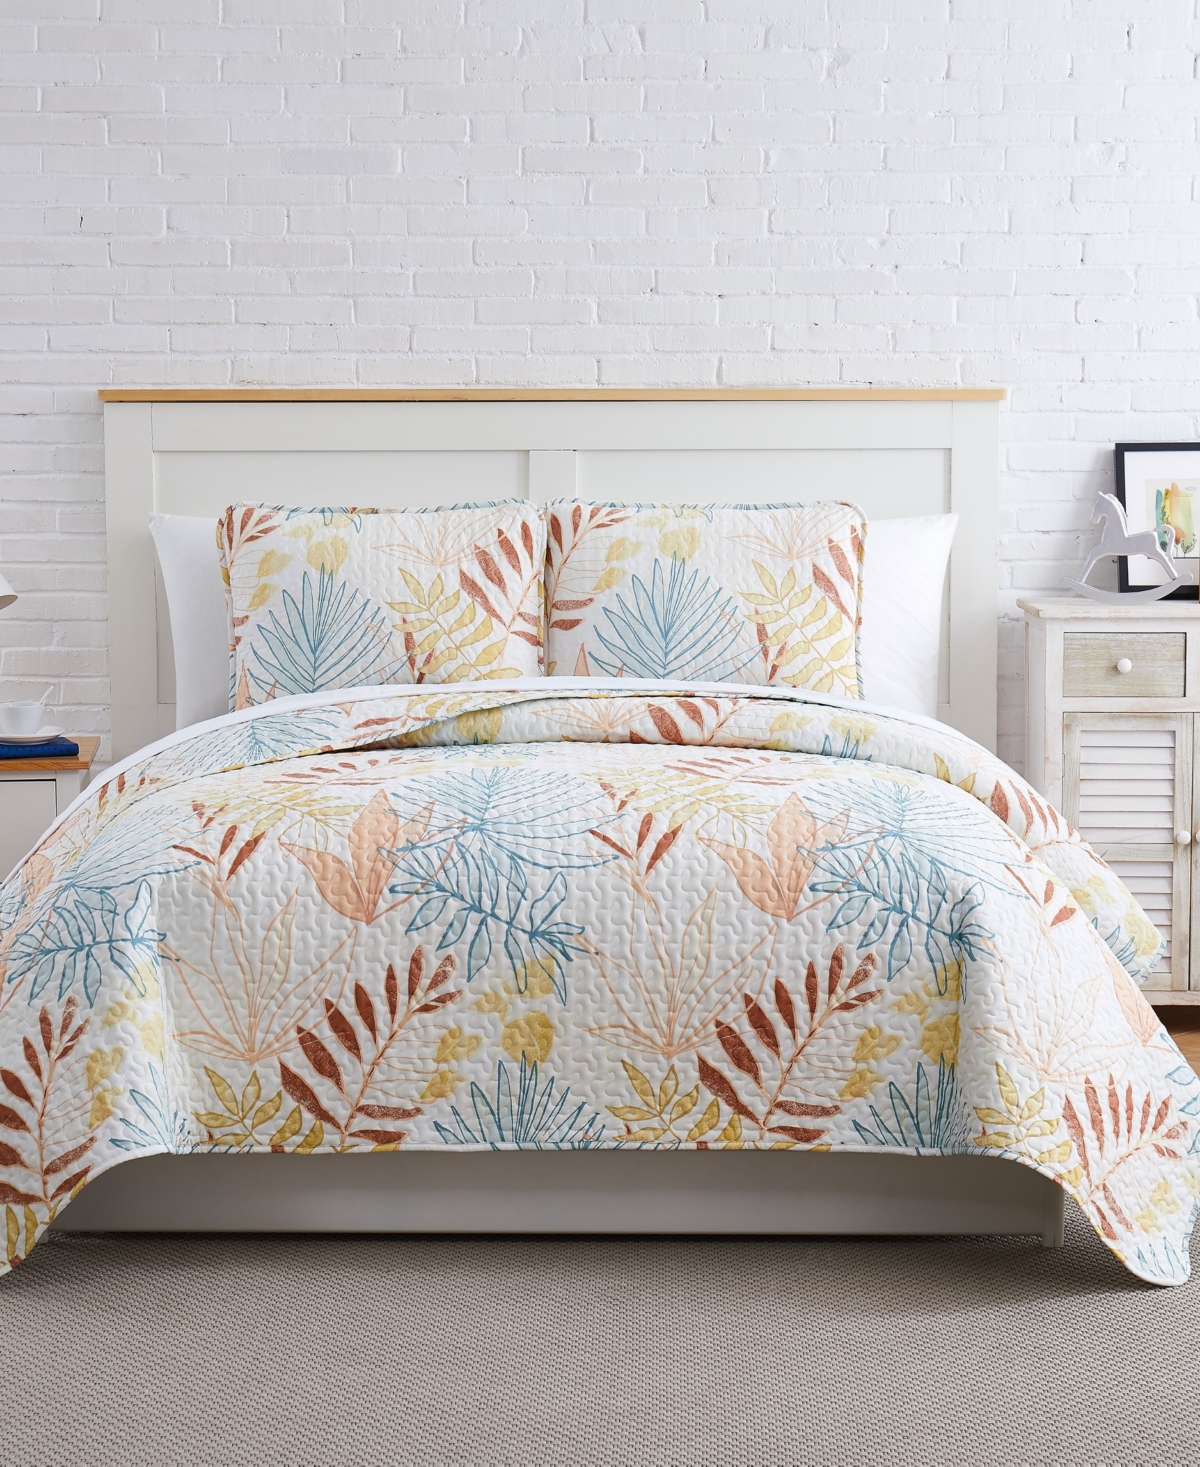 Southshore Fine Linens Tropic Leaf Quilt And Sham 3 Piece Set, Twin Or Twin Xlong In Multi